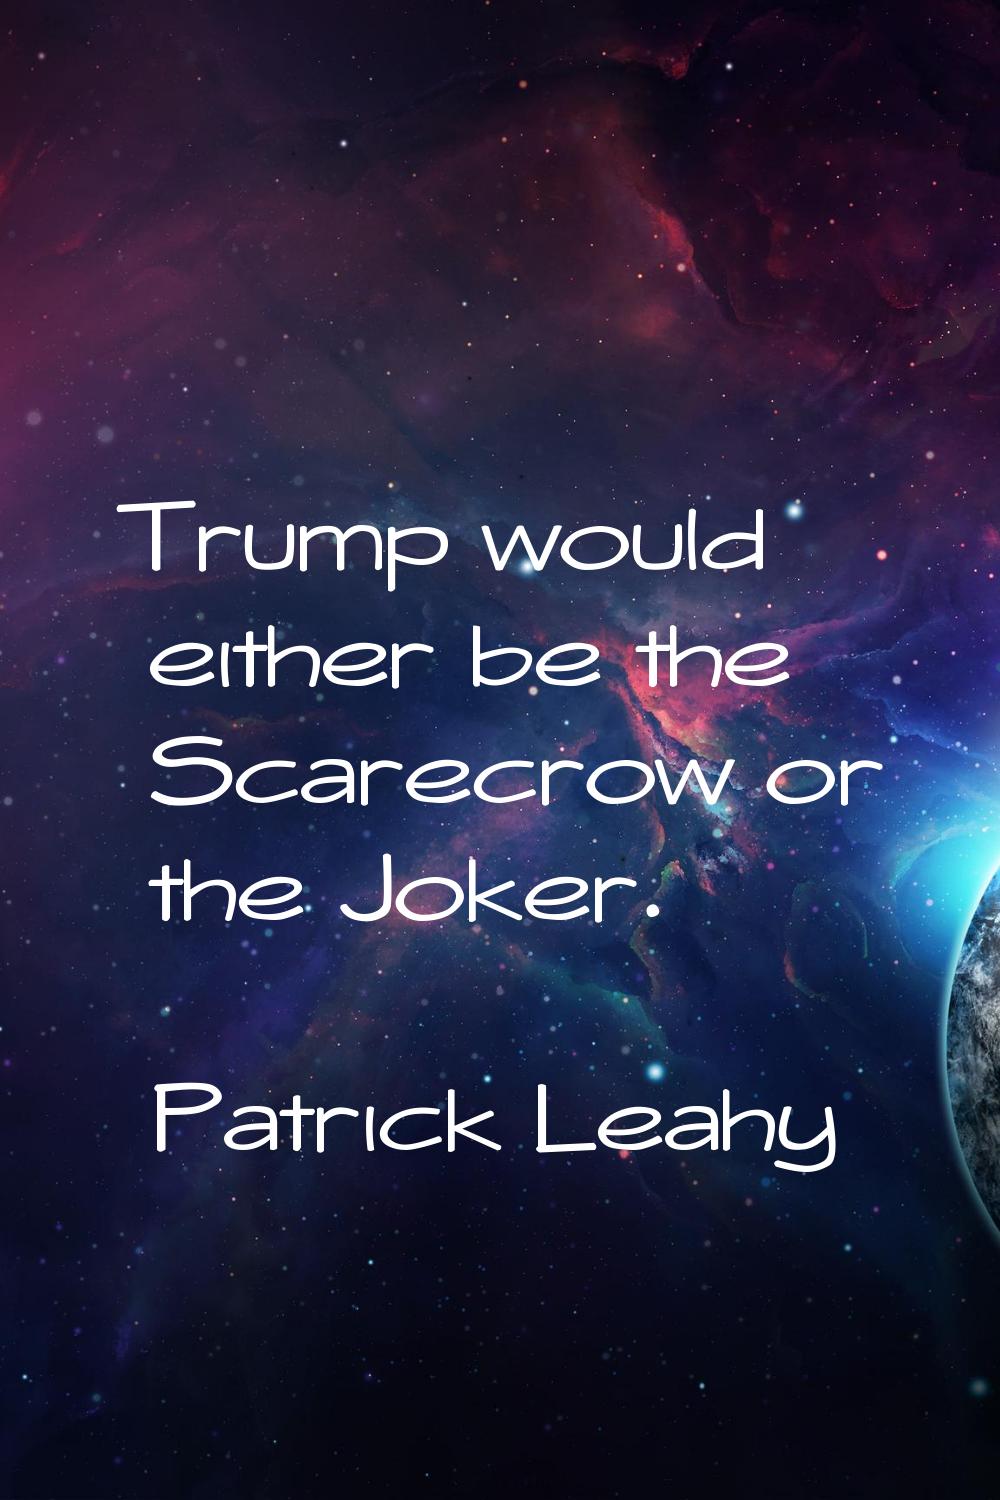 Trump would either be the Scarecrow or the Joker.